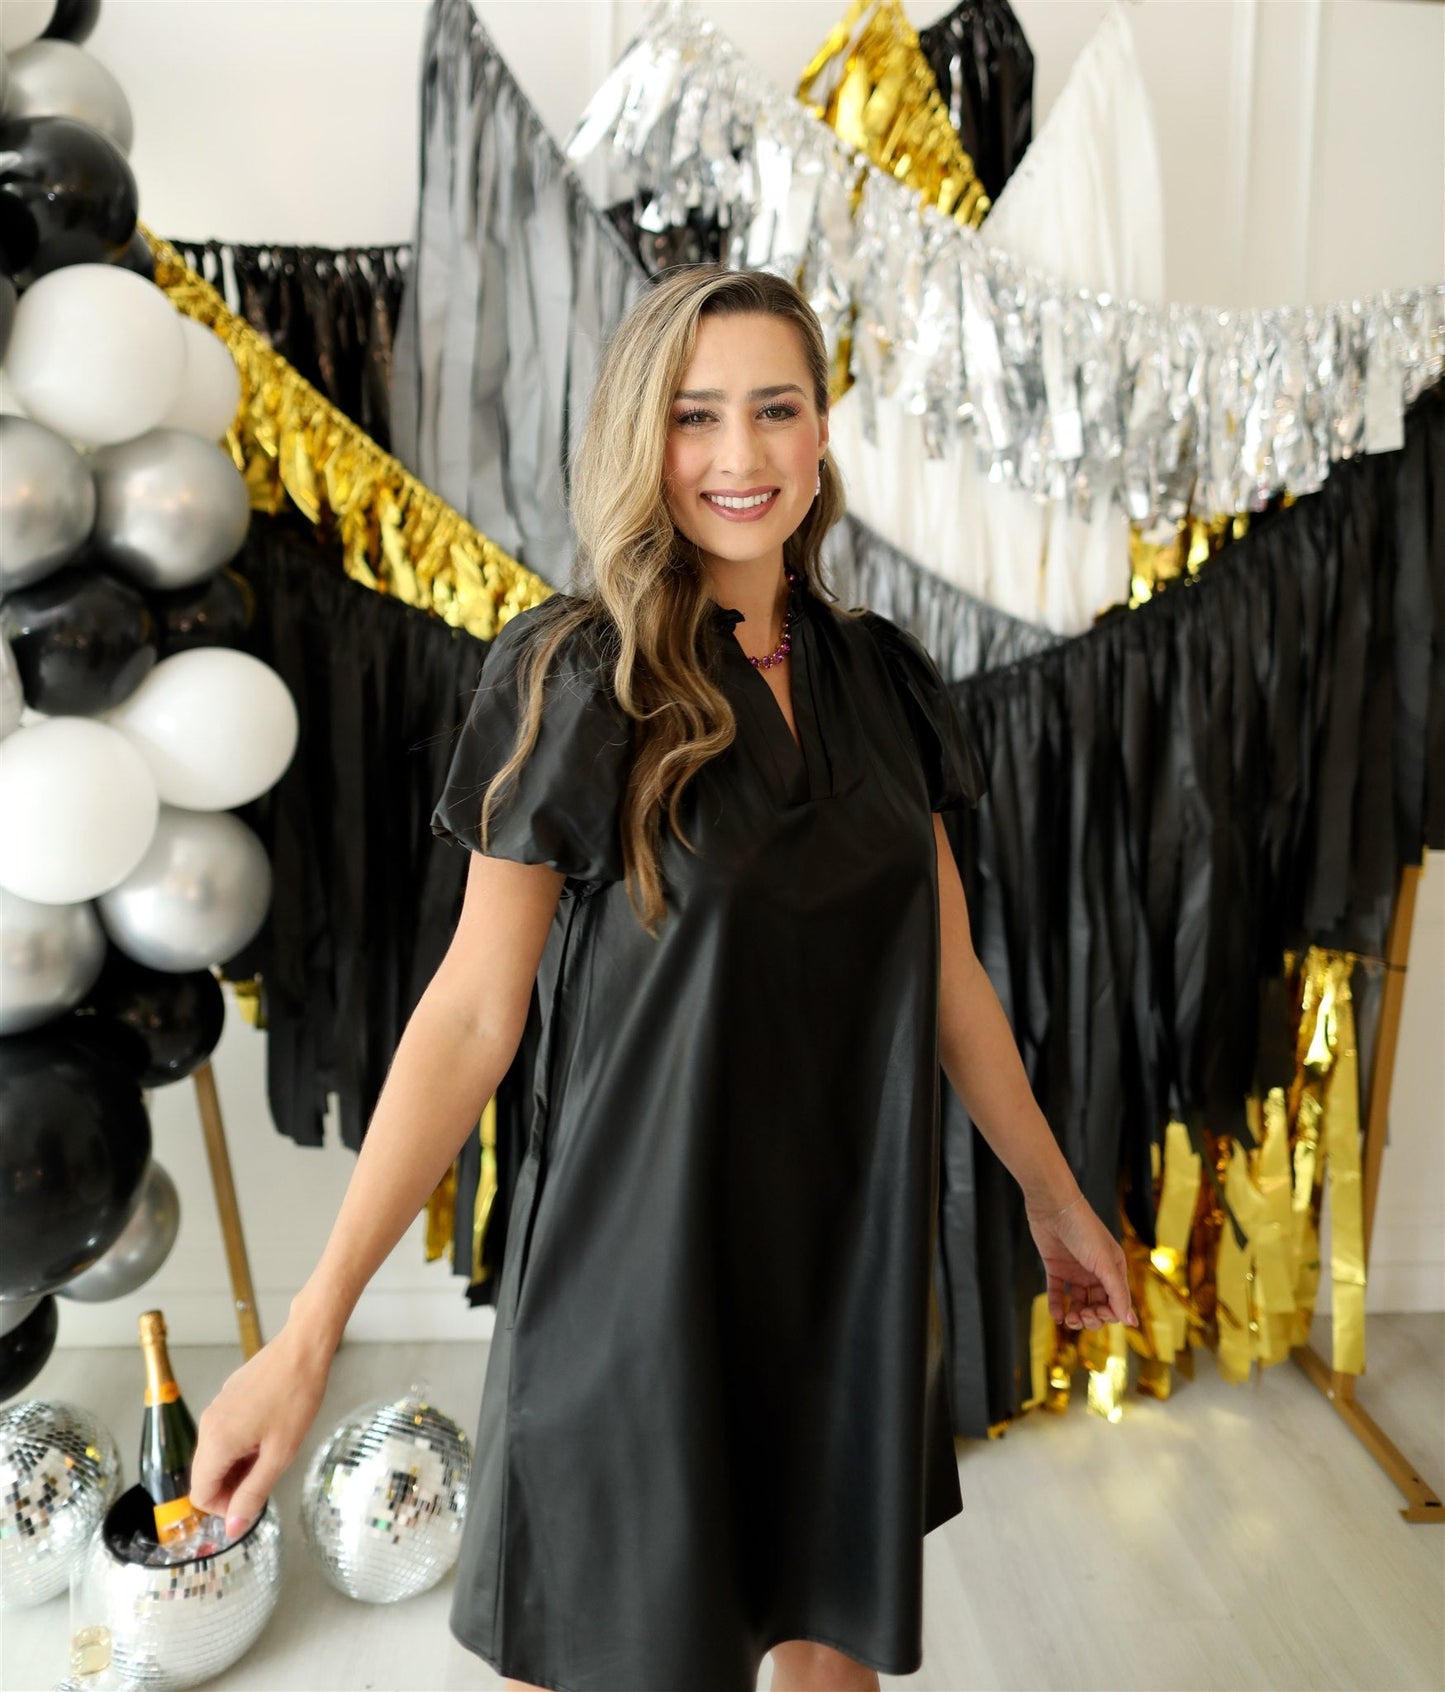 New Years Eve Garland Set-Backdrops-Oh My Darling Party Co